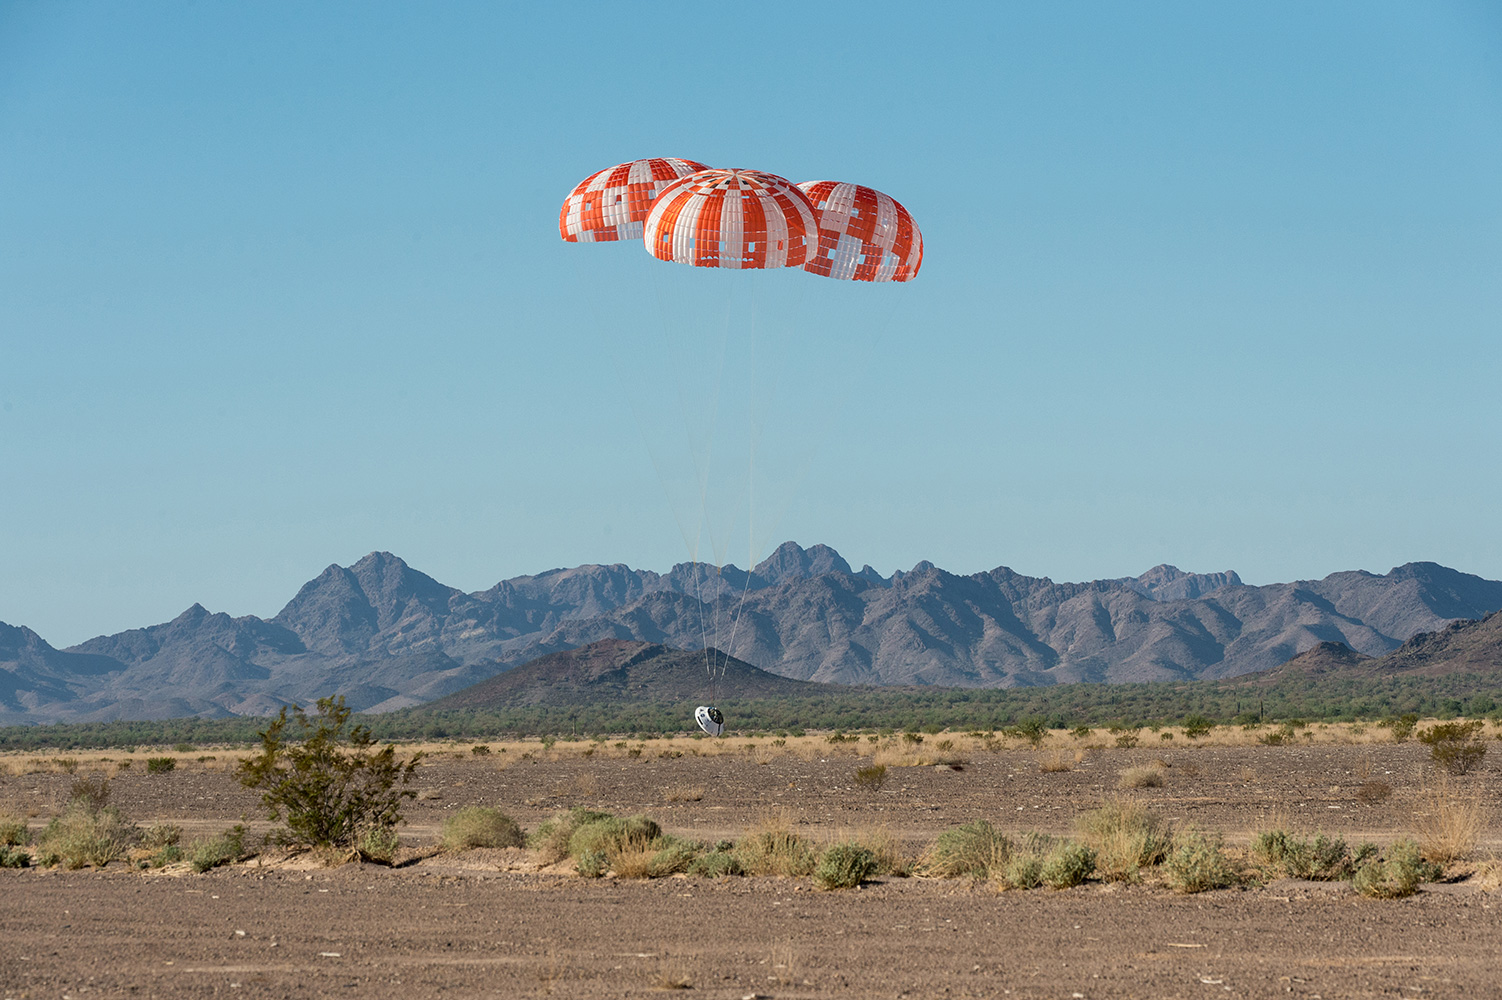 An Orion test capsule with its three main parachutes